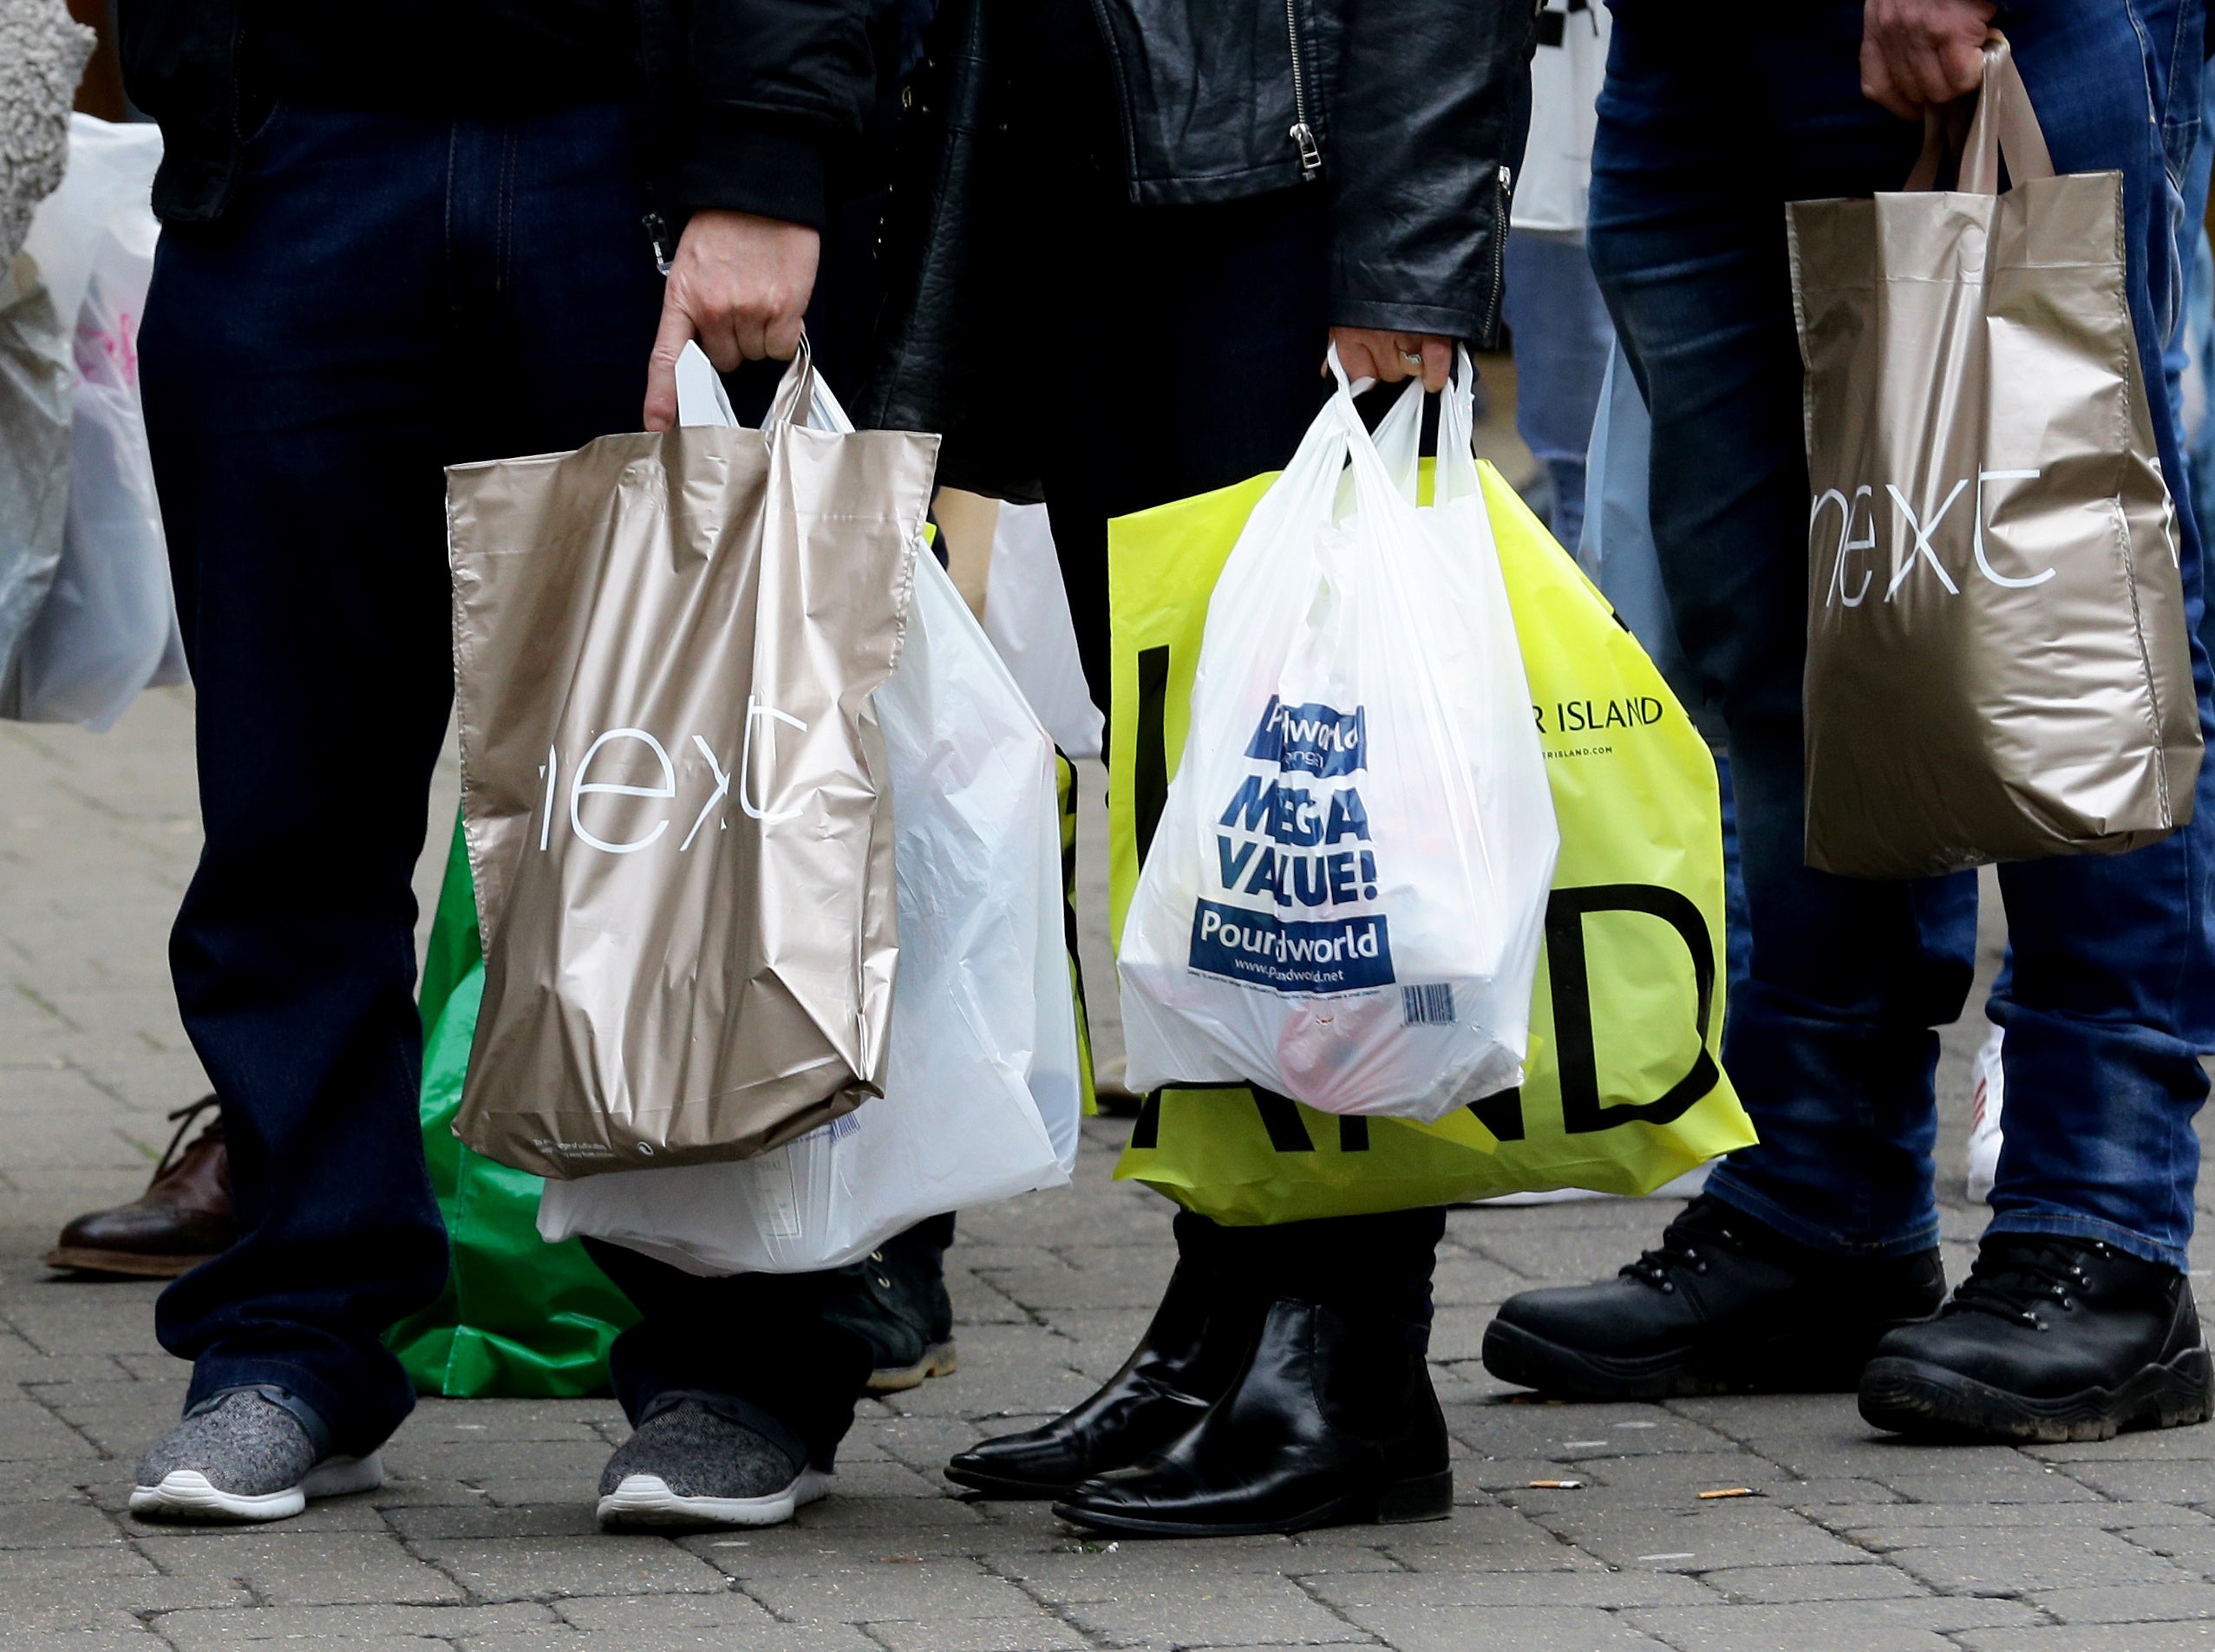 Shop prices fell by 0.6% year-on-year in May, figures show